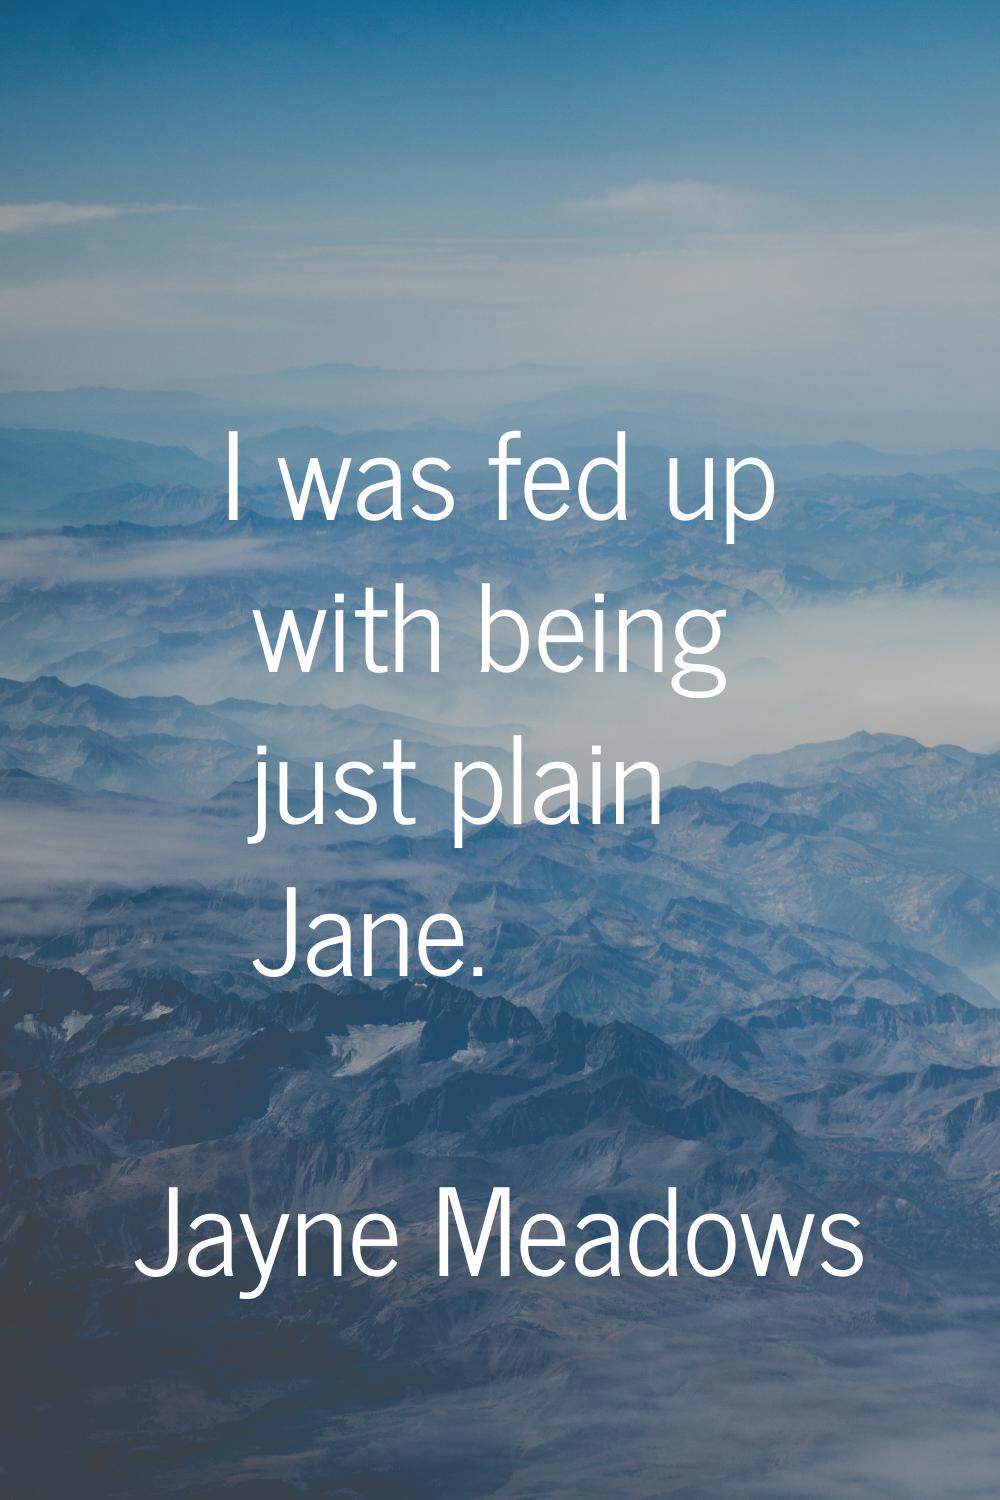 I was fed up with being just plain Jane.